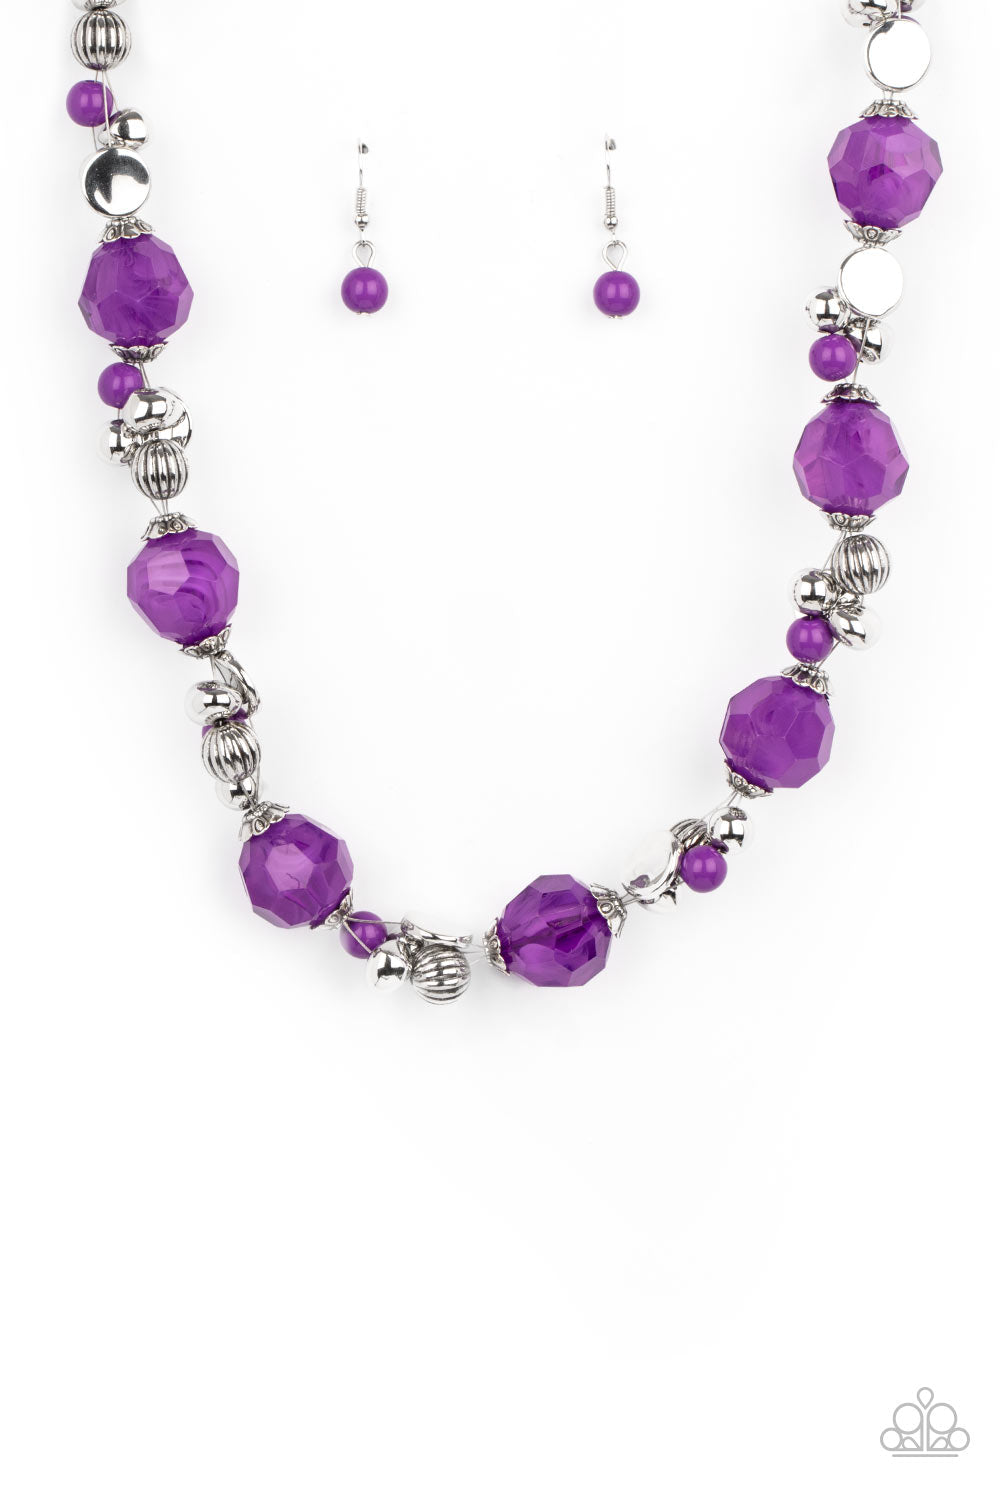 Vidi Vici VACATION - Purple - Amethyst and Silver Necklace - Paparazzi Accessories - Faceted opaque Amethyst Orchid crystal-like beads join clusters of mismatched silver and Amethyst Orchid beads along a wire, creating a vivacious pop of color below the collar. Features an adjustable clasp closure. Sold as one individual necklace.